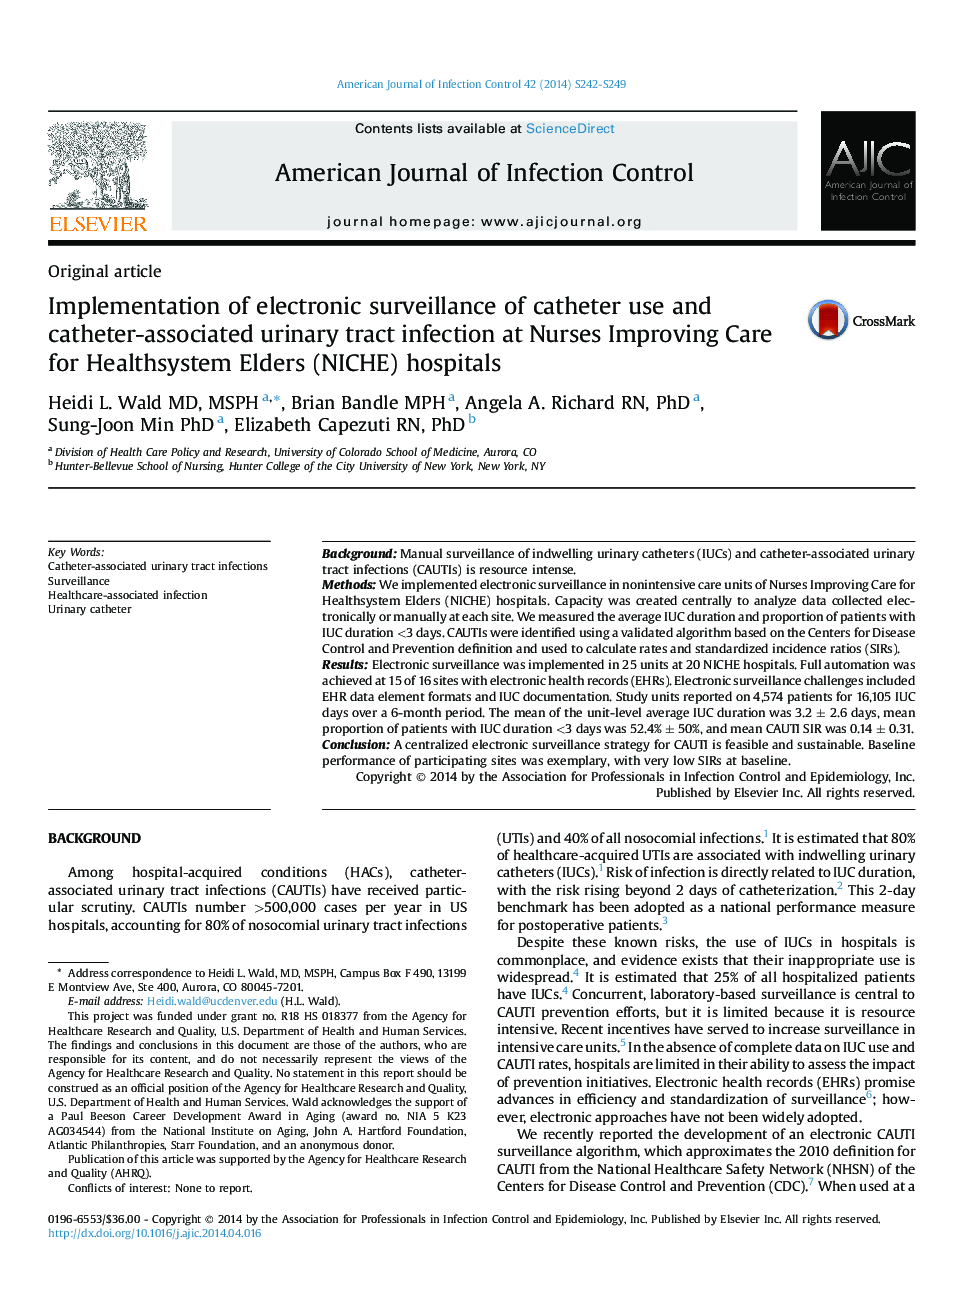 Original articleImplementation of electronic surveillance of catheter use and catheter-associated urinary tract infection at Nurses Improving Care for Healthsystem Elders (NICHE) hospitals